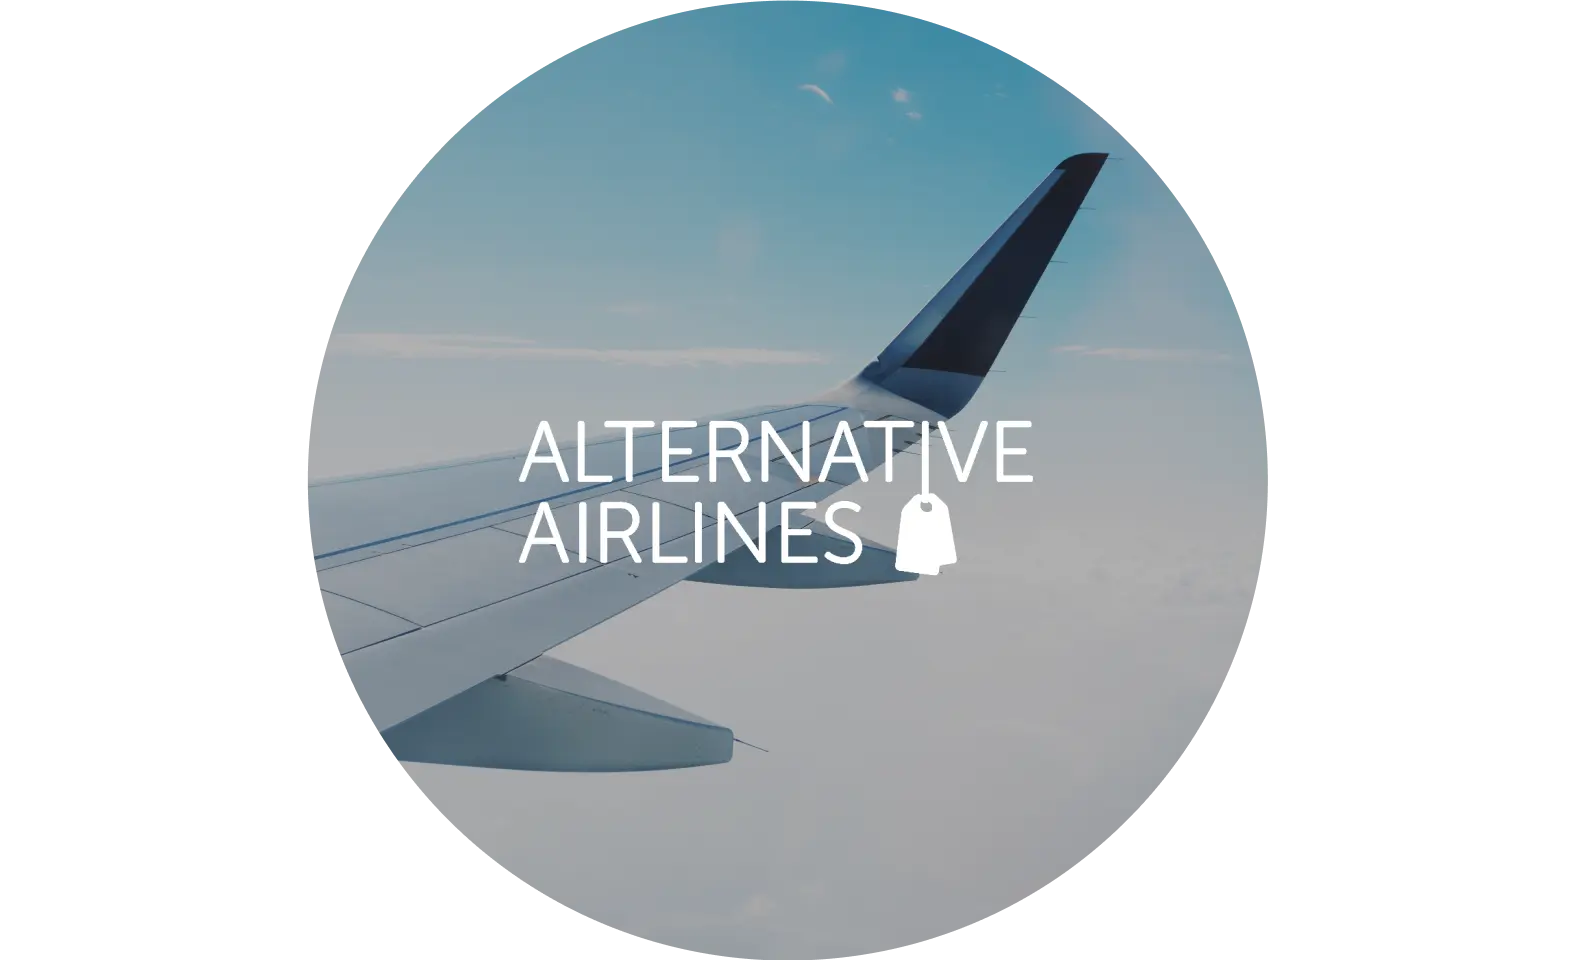 Alternative Airlines takes off with a 41% increase in AOV